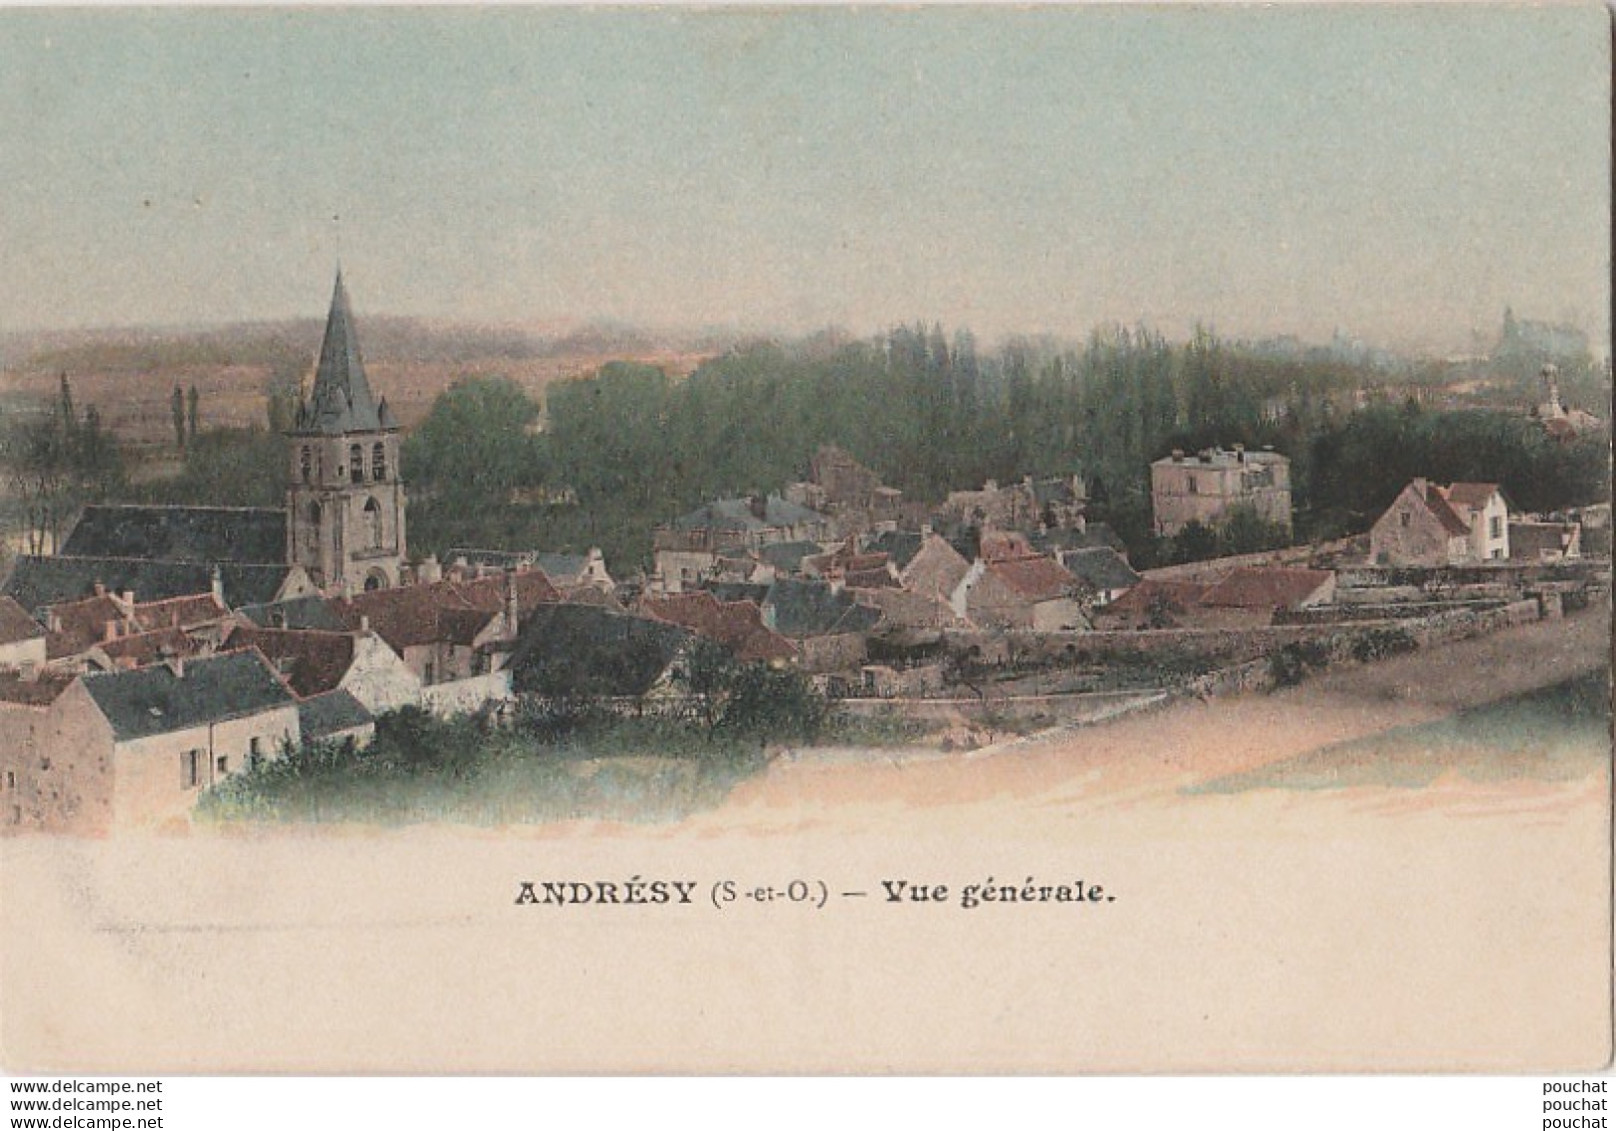 L5- 78) ANDRESY - VUE GENERALE - (COULEURS - 2 SCANS) - Andresy